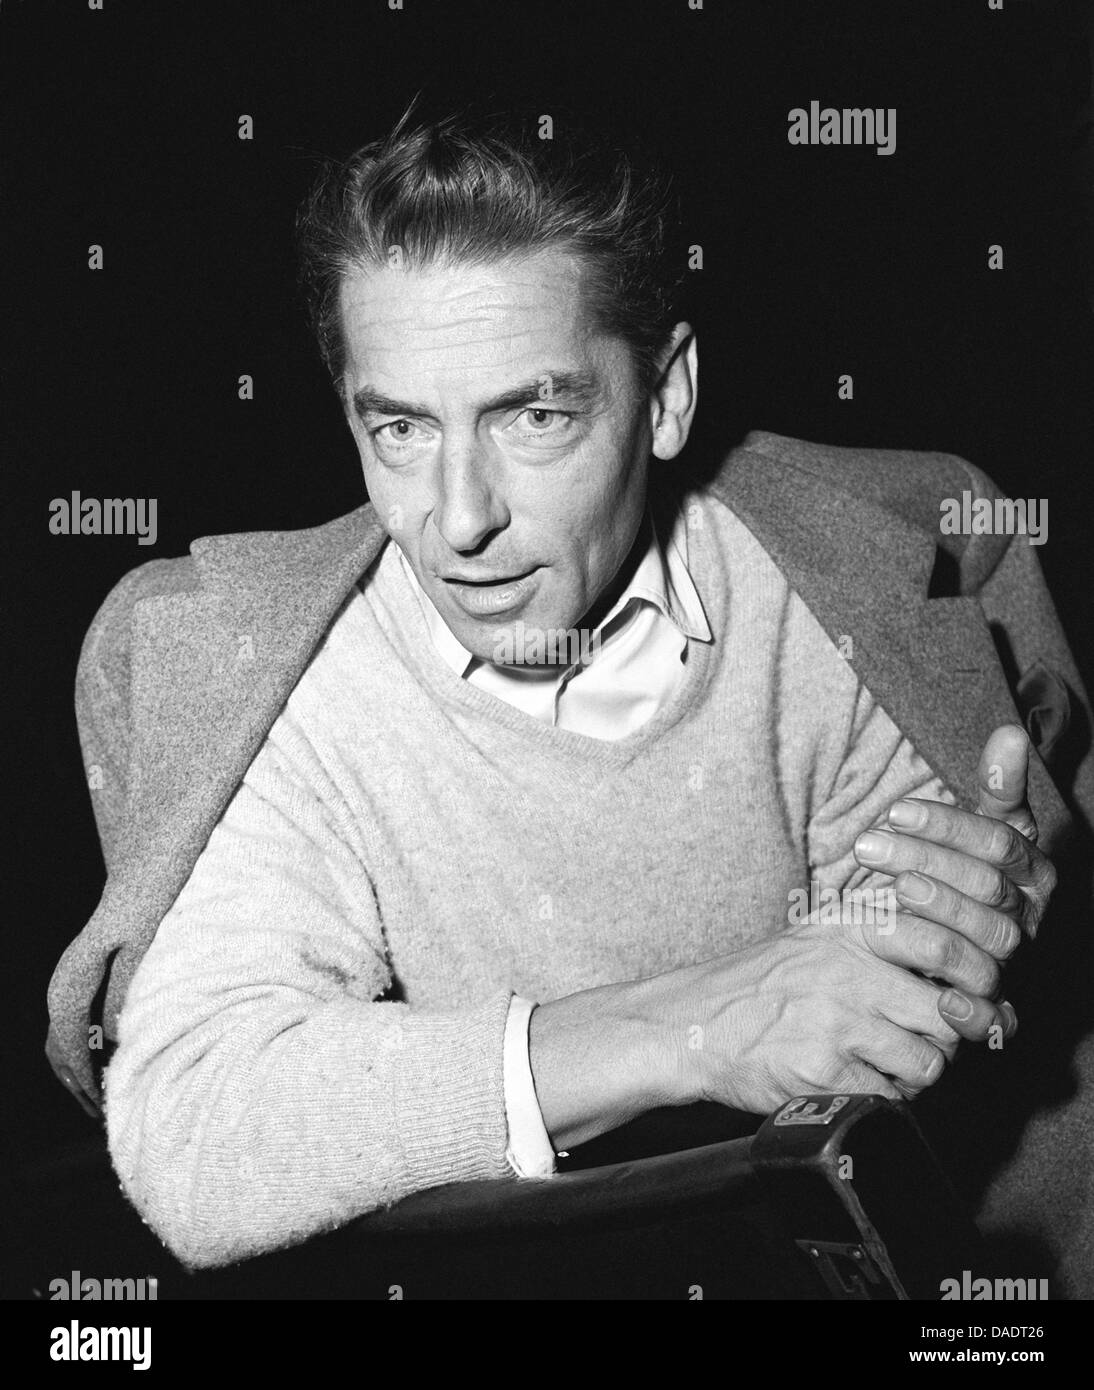 Conductor Herbert von Karajan in 1955.  Portrait by photographer Fred Stein (1909-1967) who emigrated 1933 from Nazi Germany to France and finally to the USA. Stock Photo